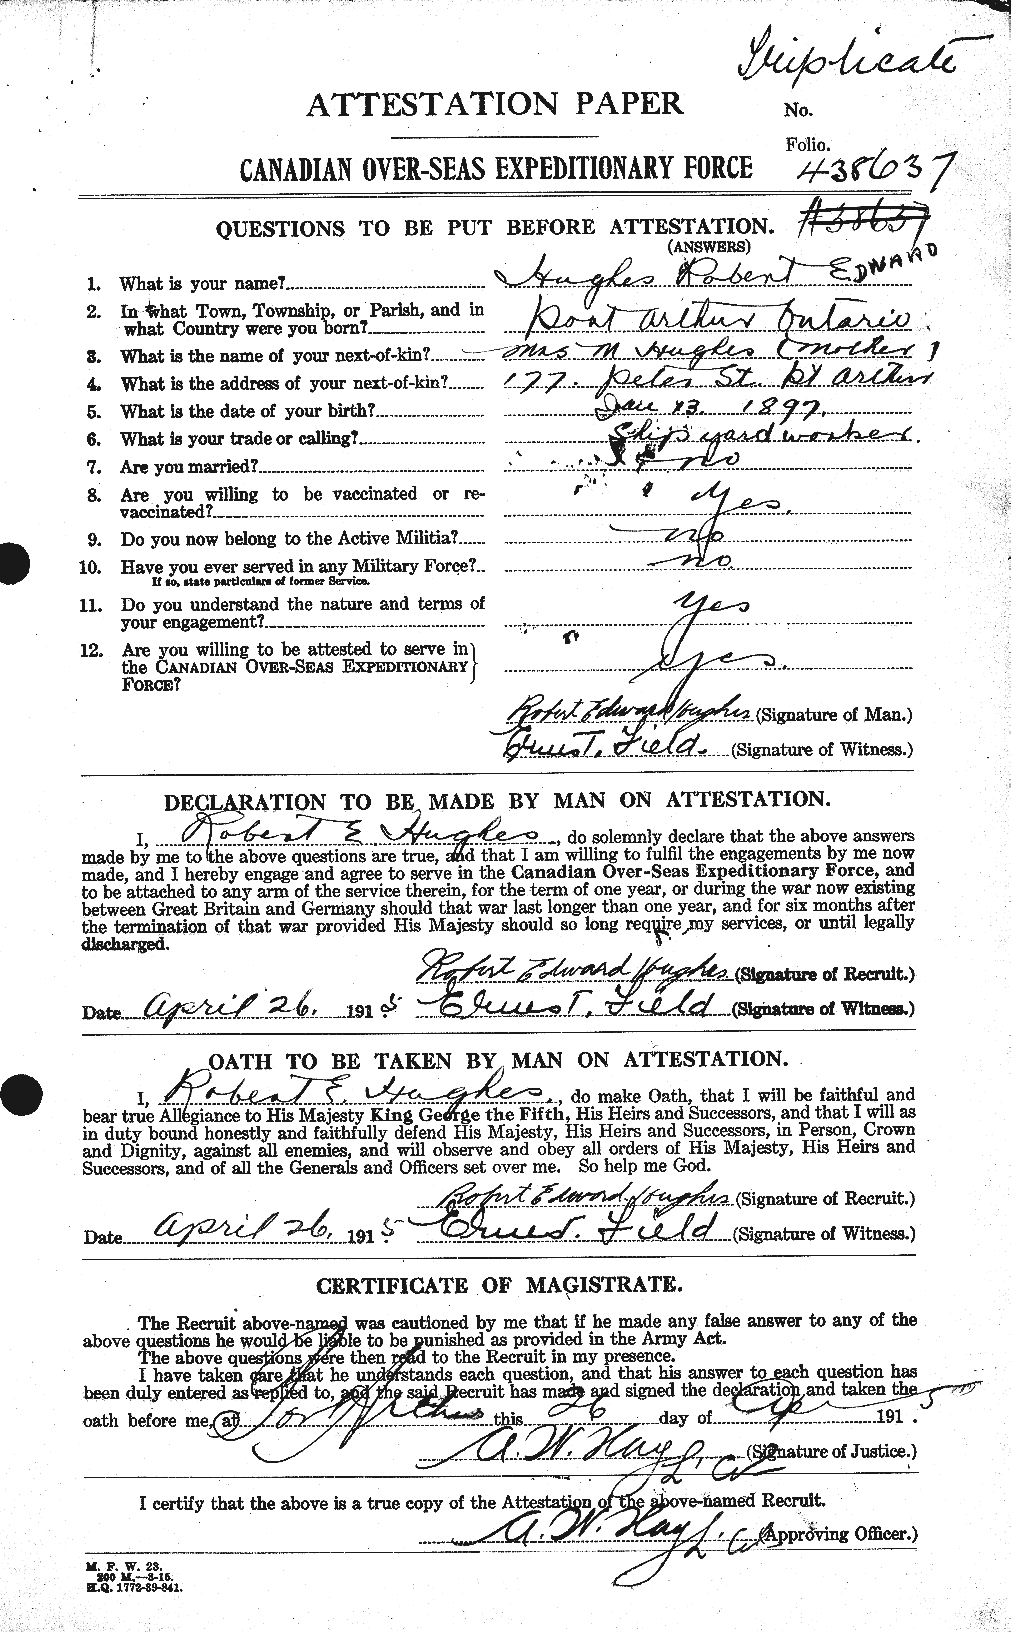 Personnel Records of the First World War - CEF 406609a